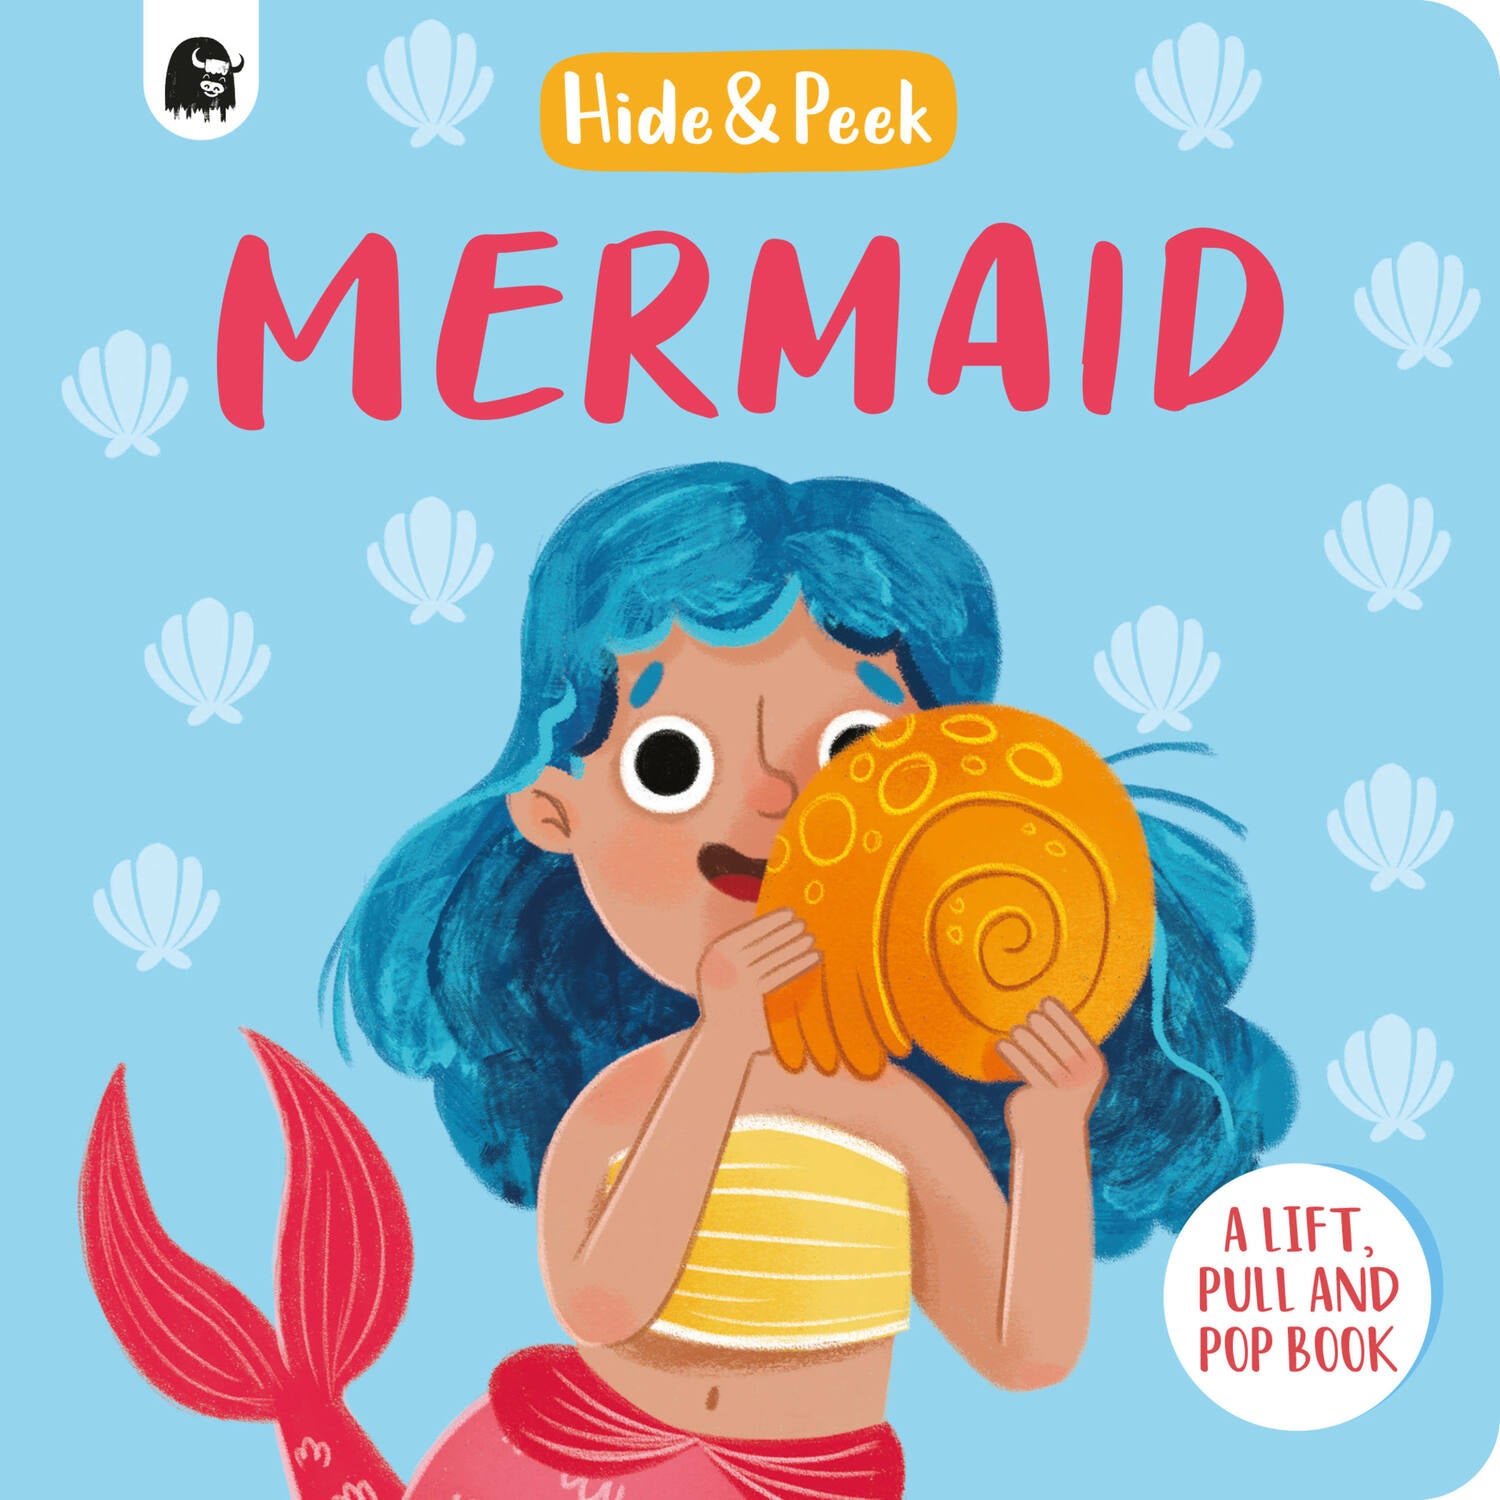 Mermaid: A lift, pull, and pop book